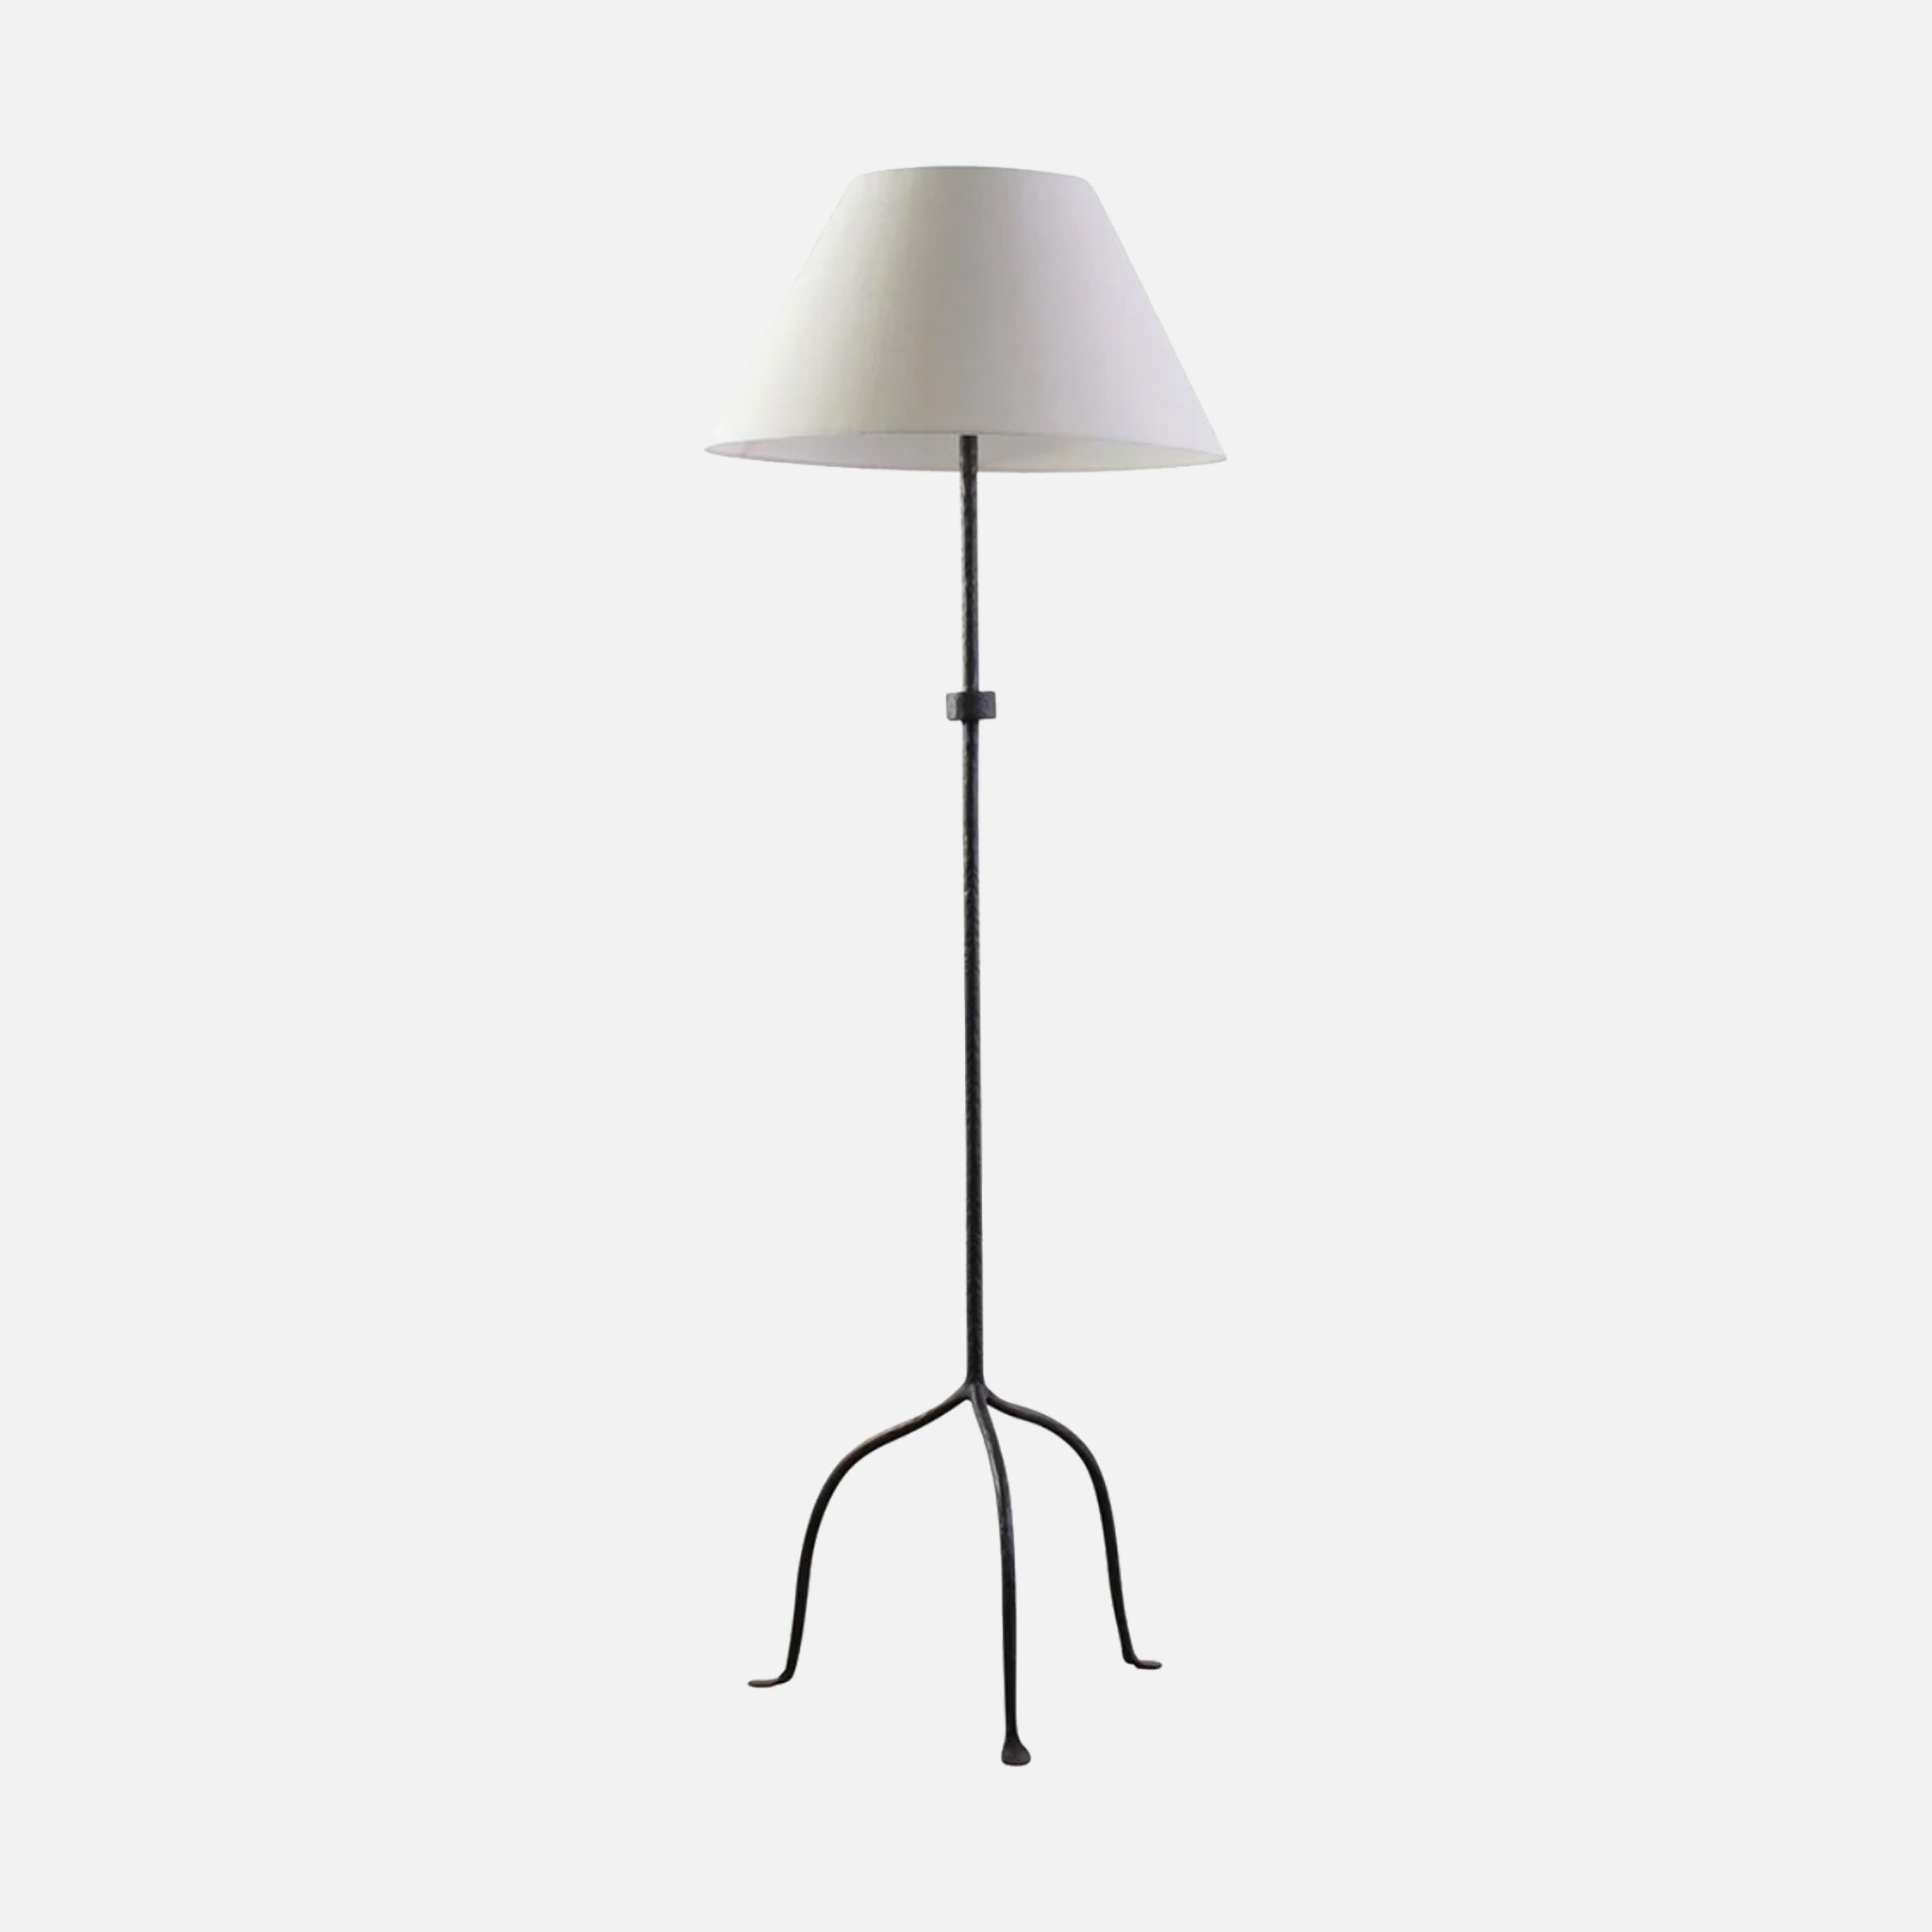 The image of an 1940s Style Hammered Iron Standard Lamp product